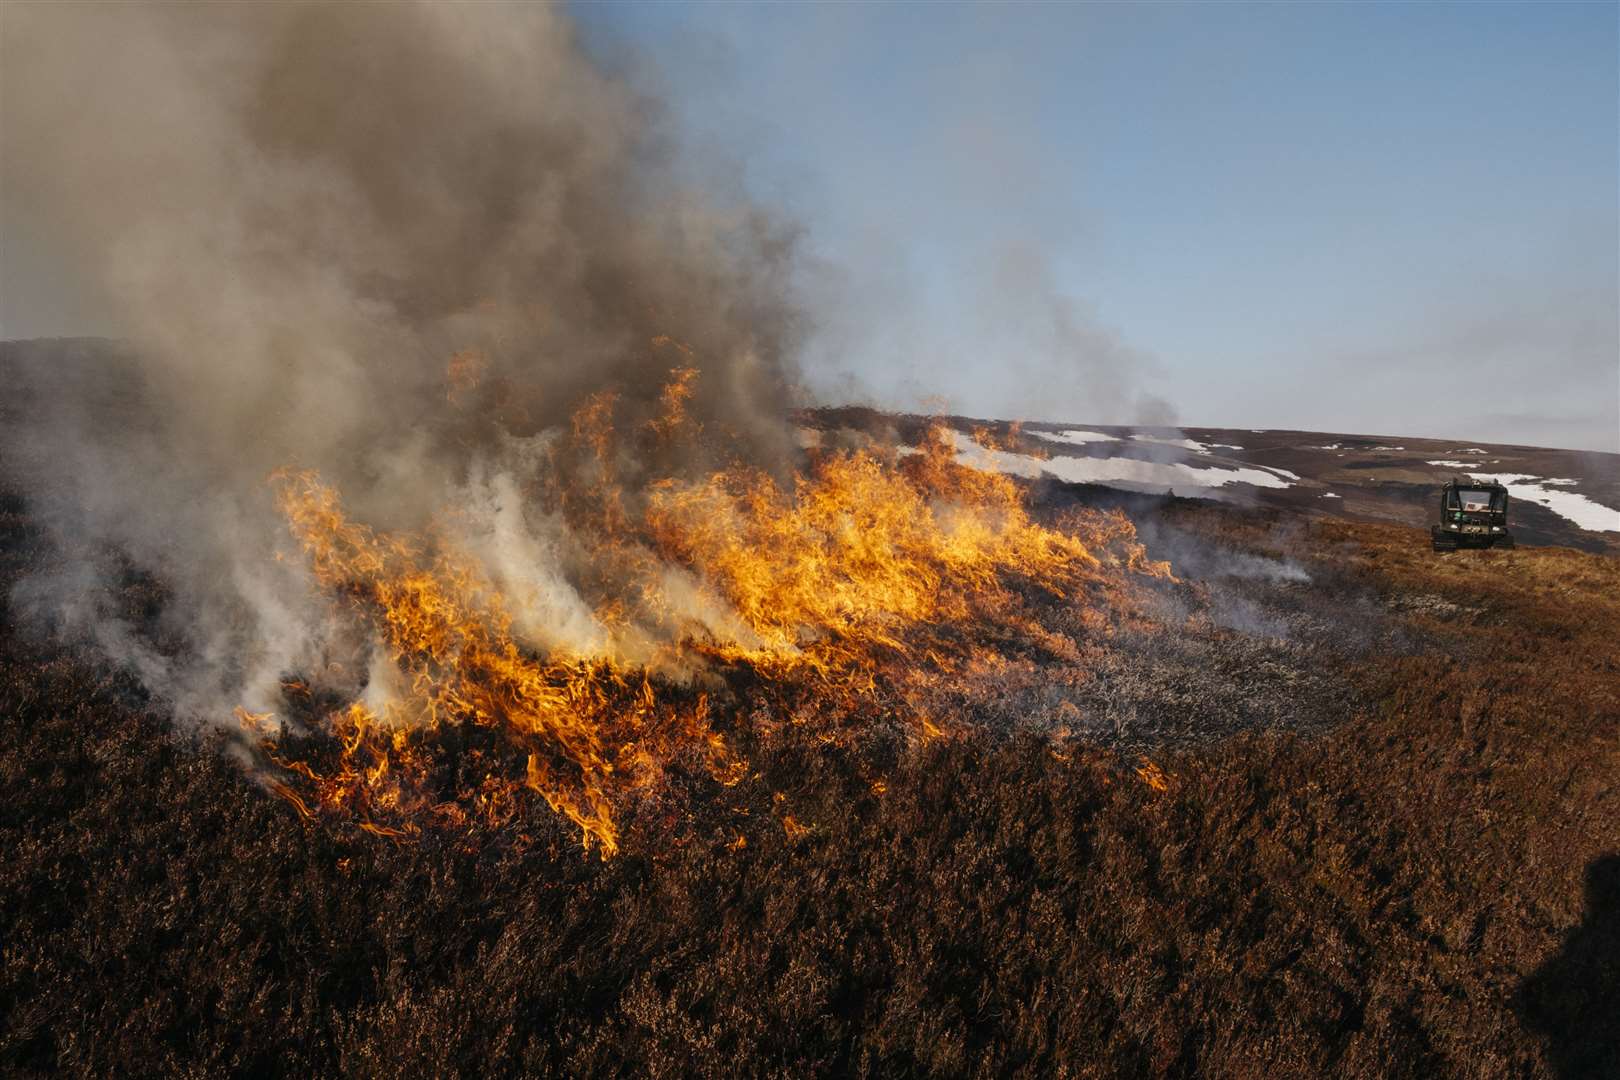 Latest research is pointing towards new findings that , in the right conditions, skilled muirburn or ‘prescribed burning’ can help to keep carbon in peatlands.